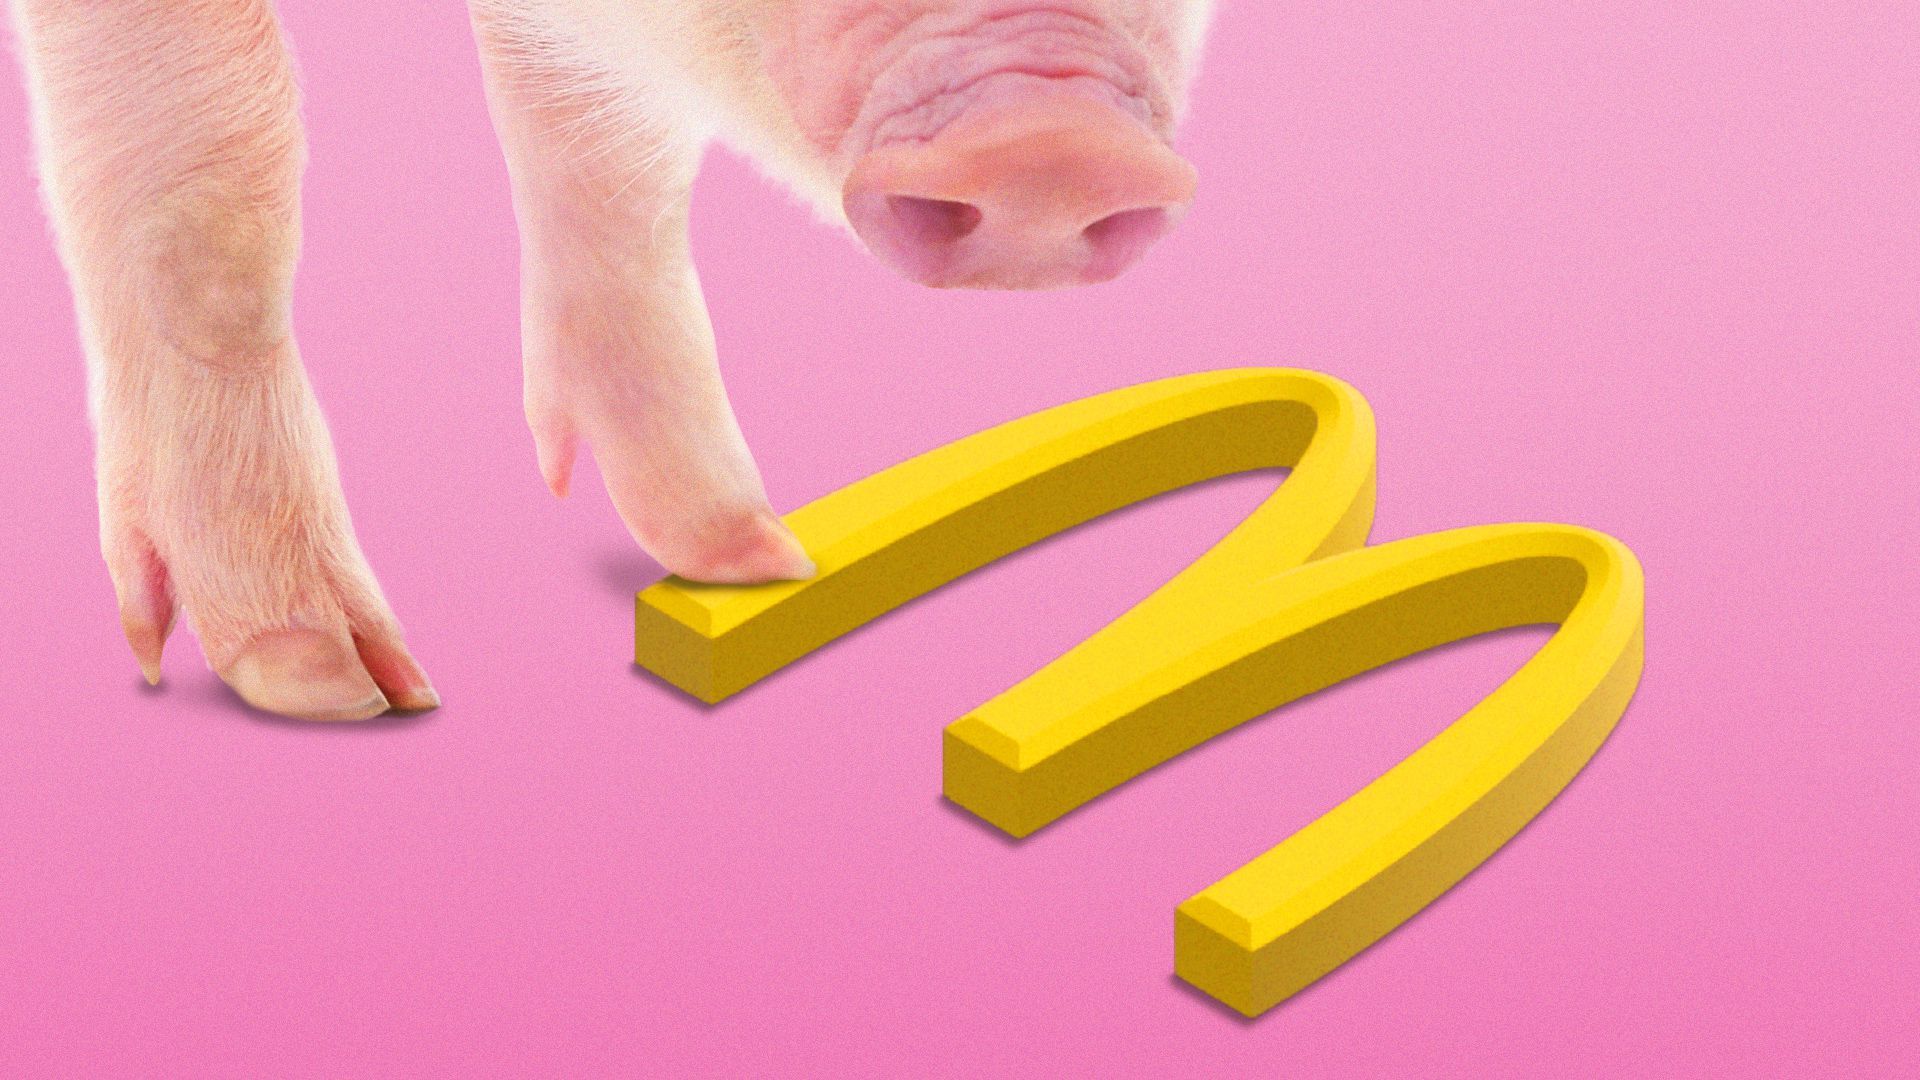 Illustration of a pig stepping on the McDonald's logo.